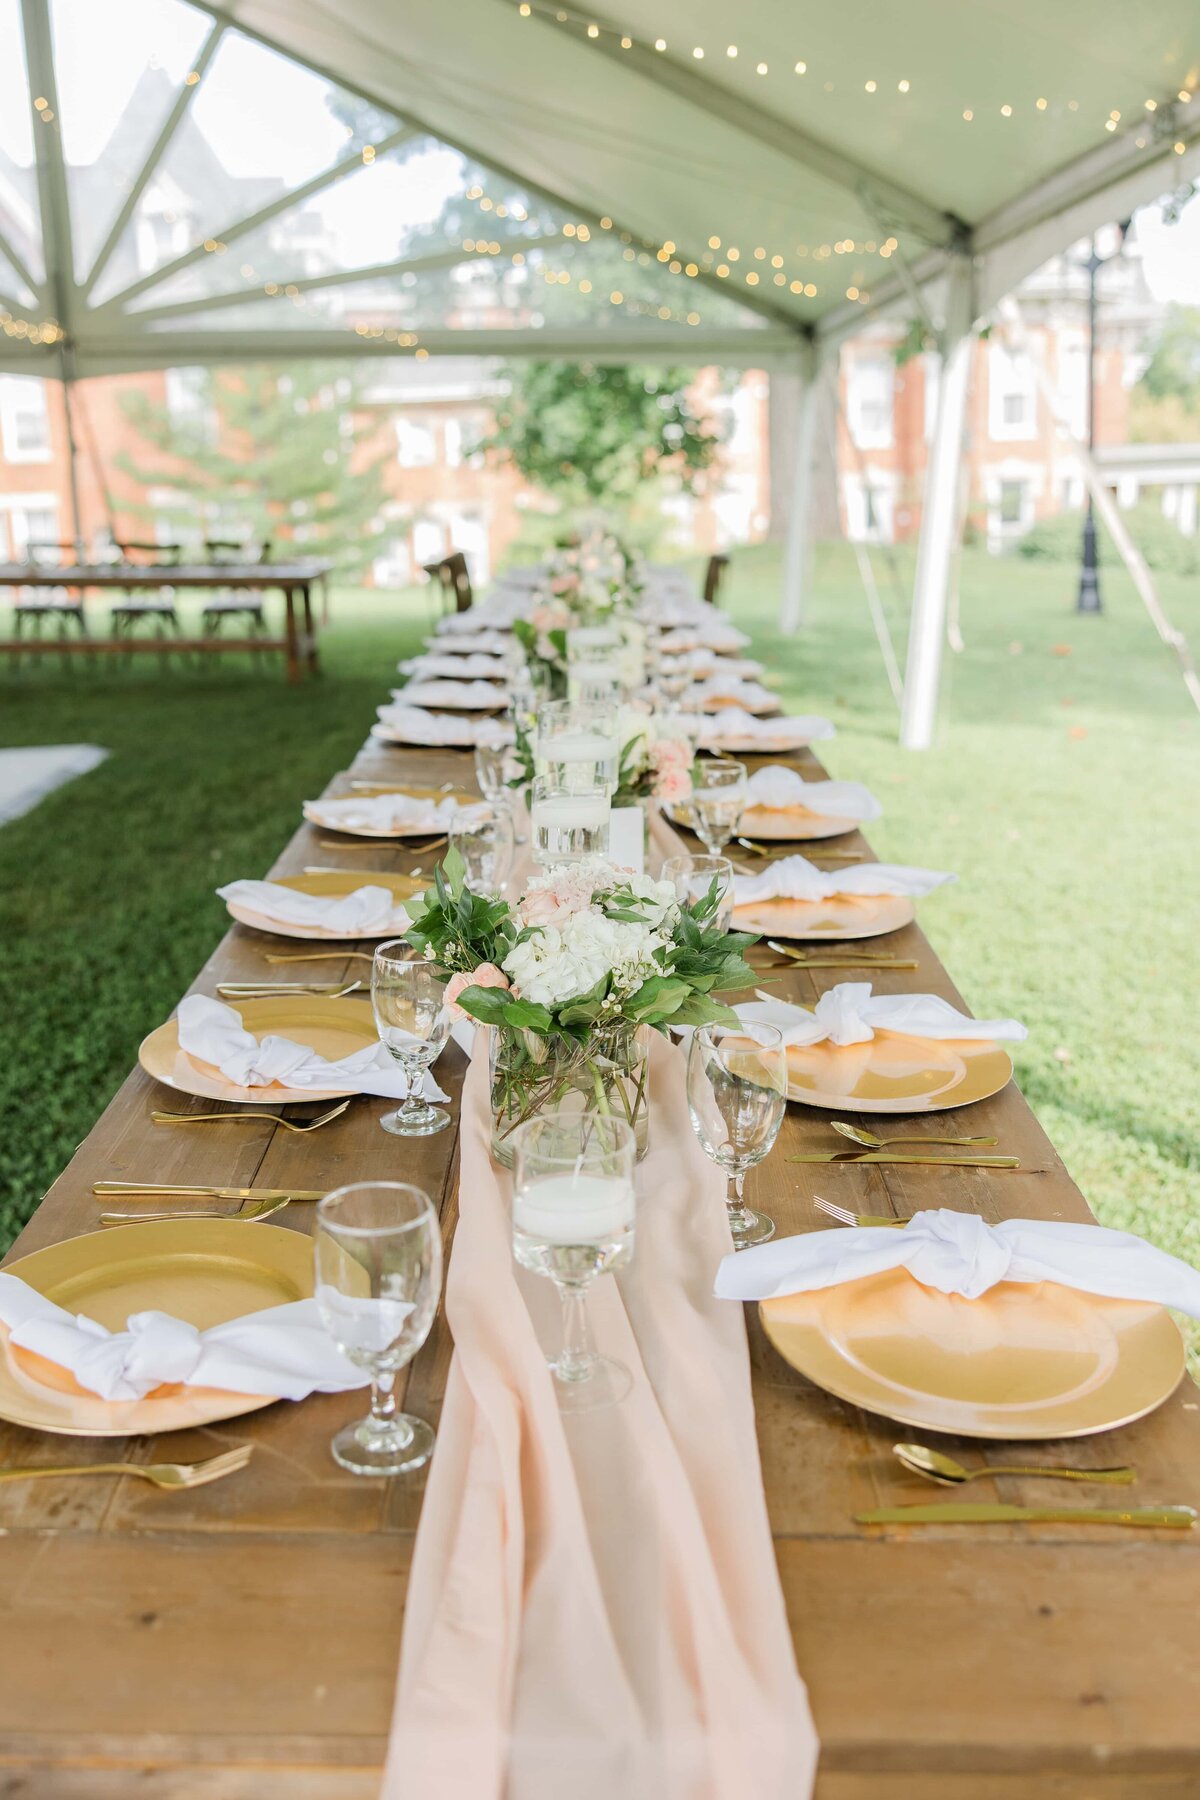 Elegantly set dining table for an outdoor Iowa wedding with golden plates, glasses, and floral centerpieces under a tent with string lights.